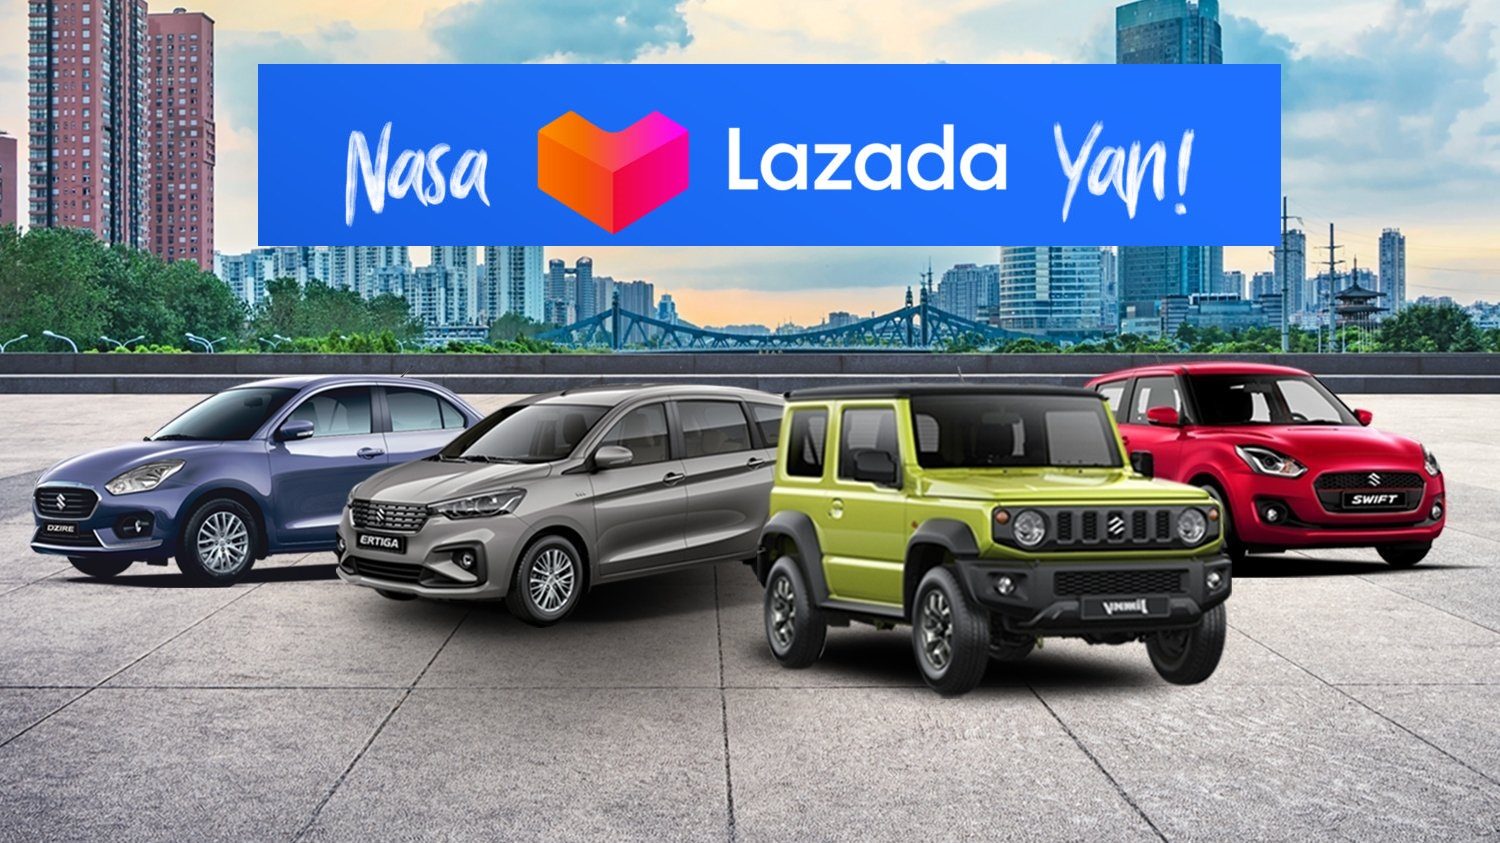 Suzuki Is Now on Lazada With the Best 12.12 Promo Offering